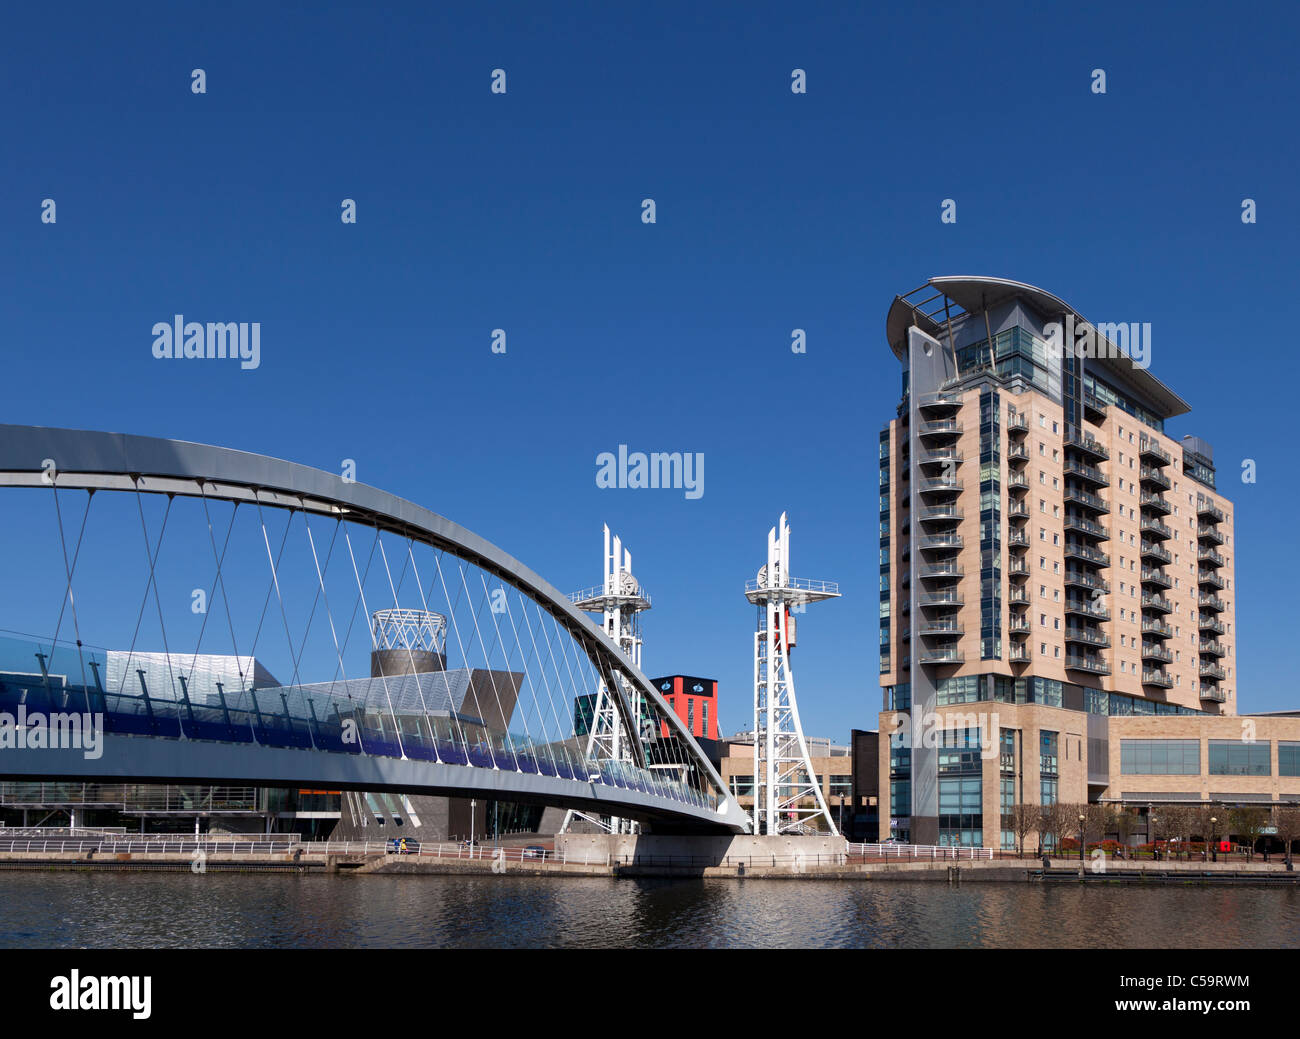 Lowry bridge and Lowry Outlet Mall, Salford quays, Greater Manchester, England Stock Photo